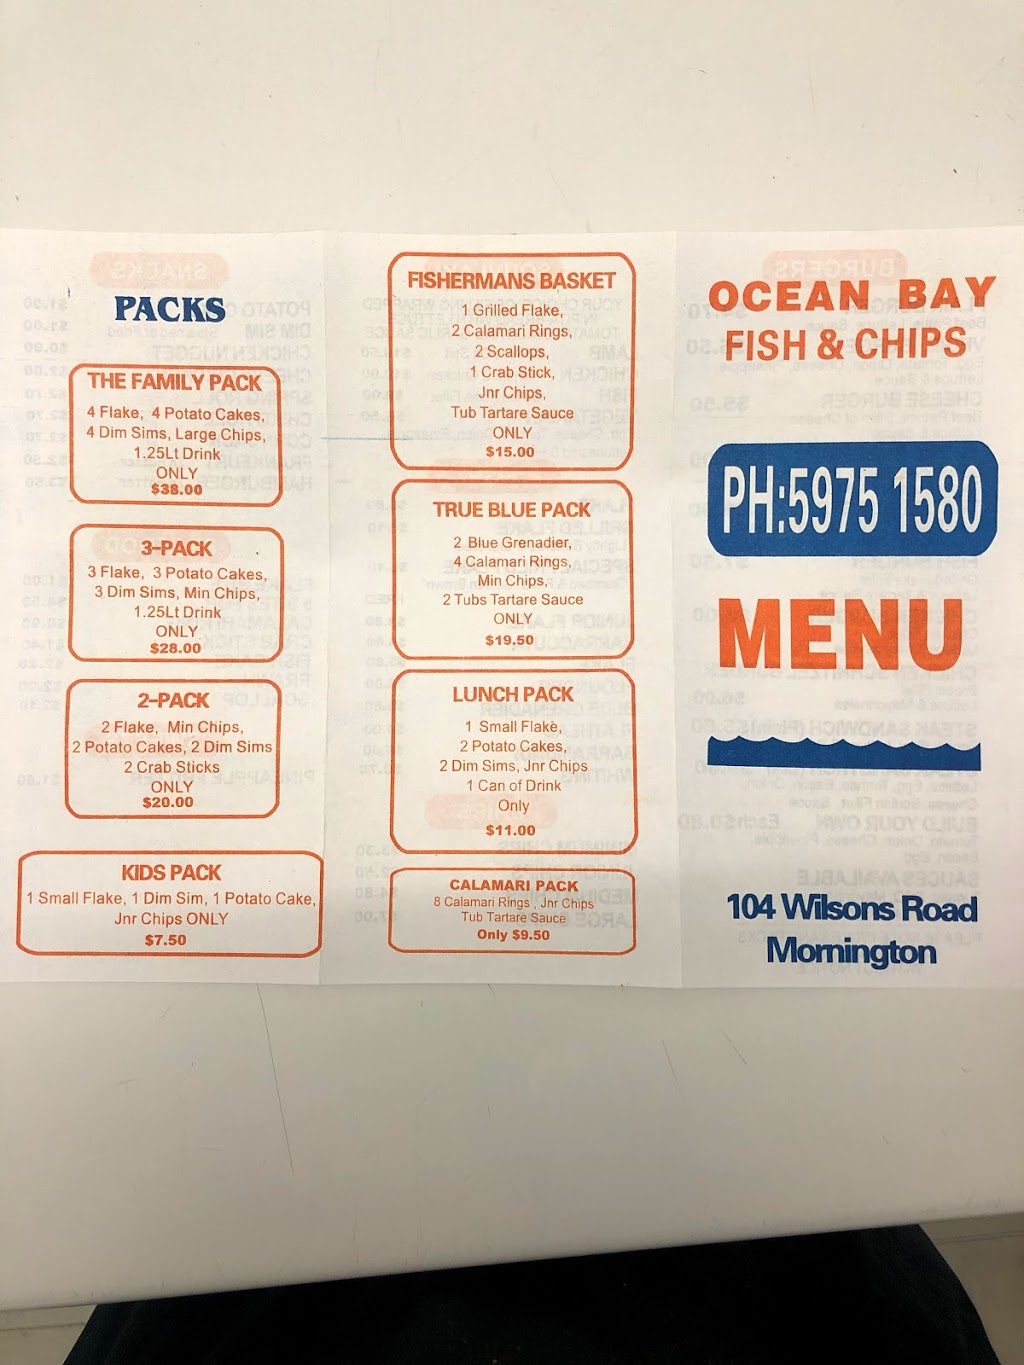 OCEAN BAY FISH AND CHIPS | meal takeaway | 104 Wilsons Rd, Mornington VIC 3931, Australia | 0359751580 OR +61 3 5975 1580